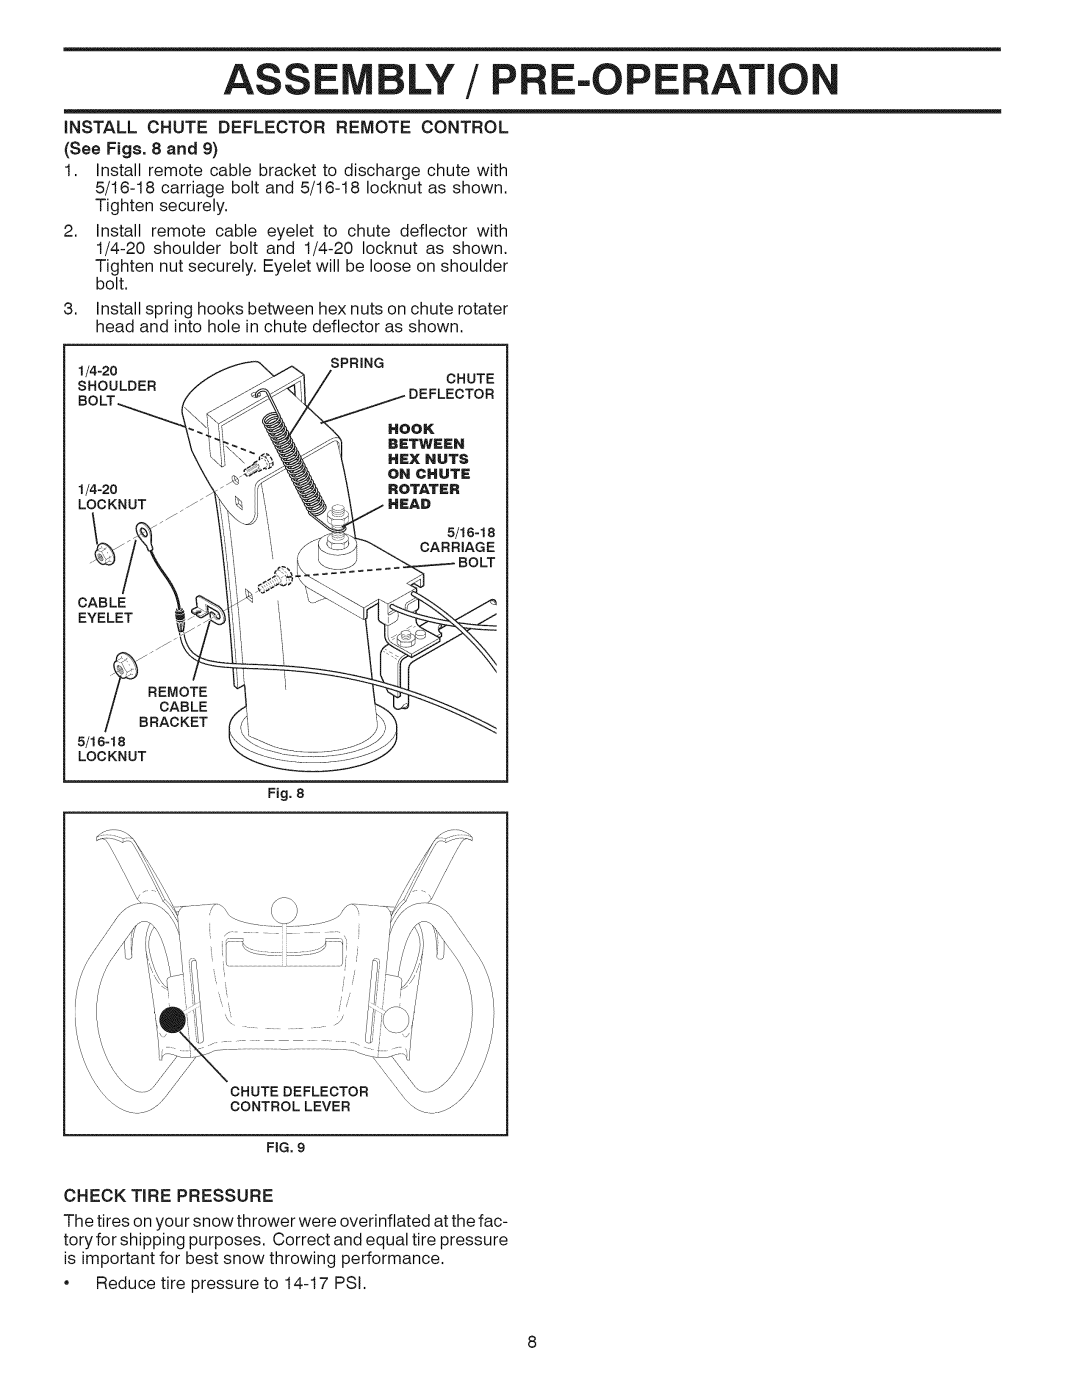 Craftsman 944.528398 owner manual Asse Bly/Pre-Operation, iNSTALL CHUTE DEFLECTOR REMOTE CONTROL 